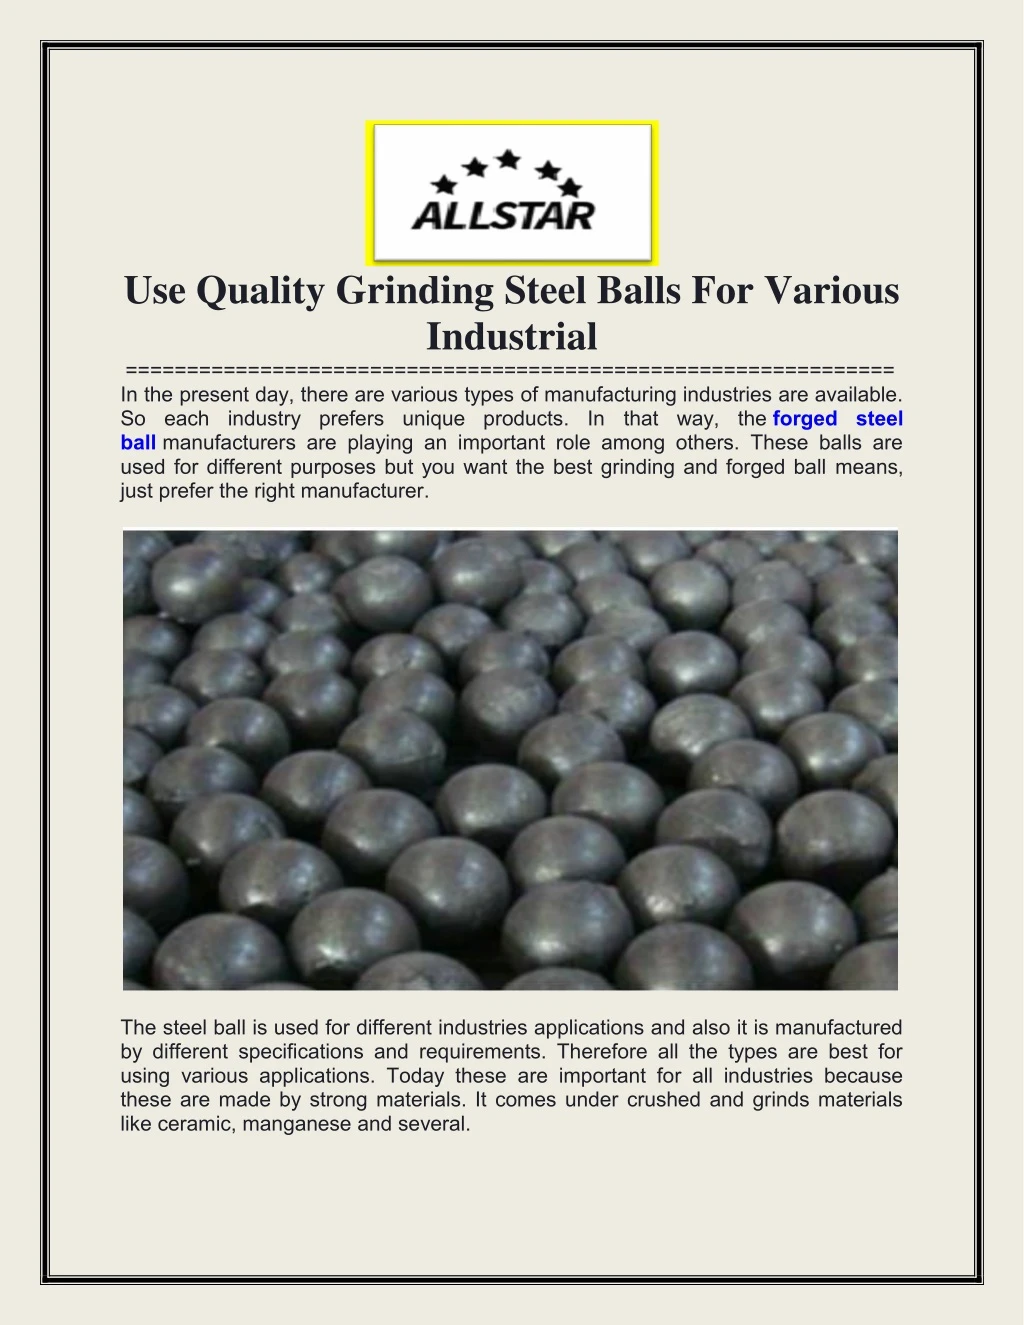 use quality grinding steel balls for various